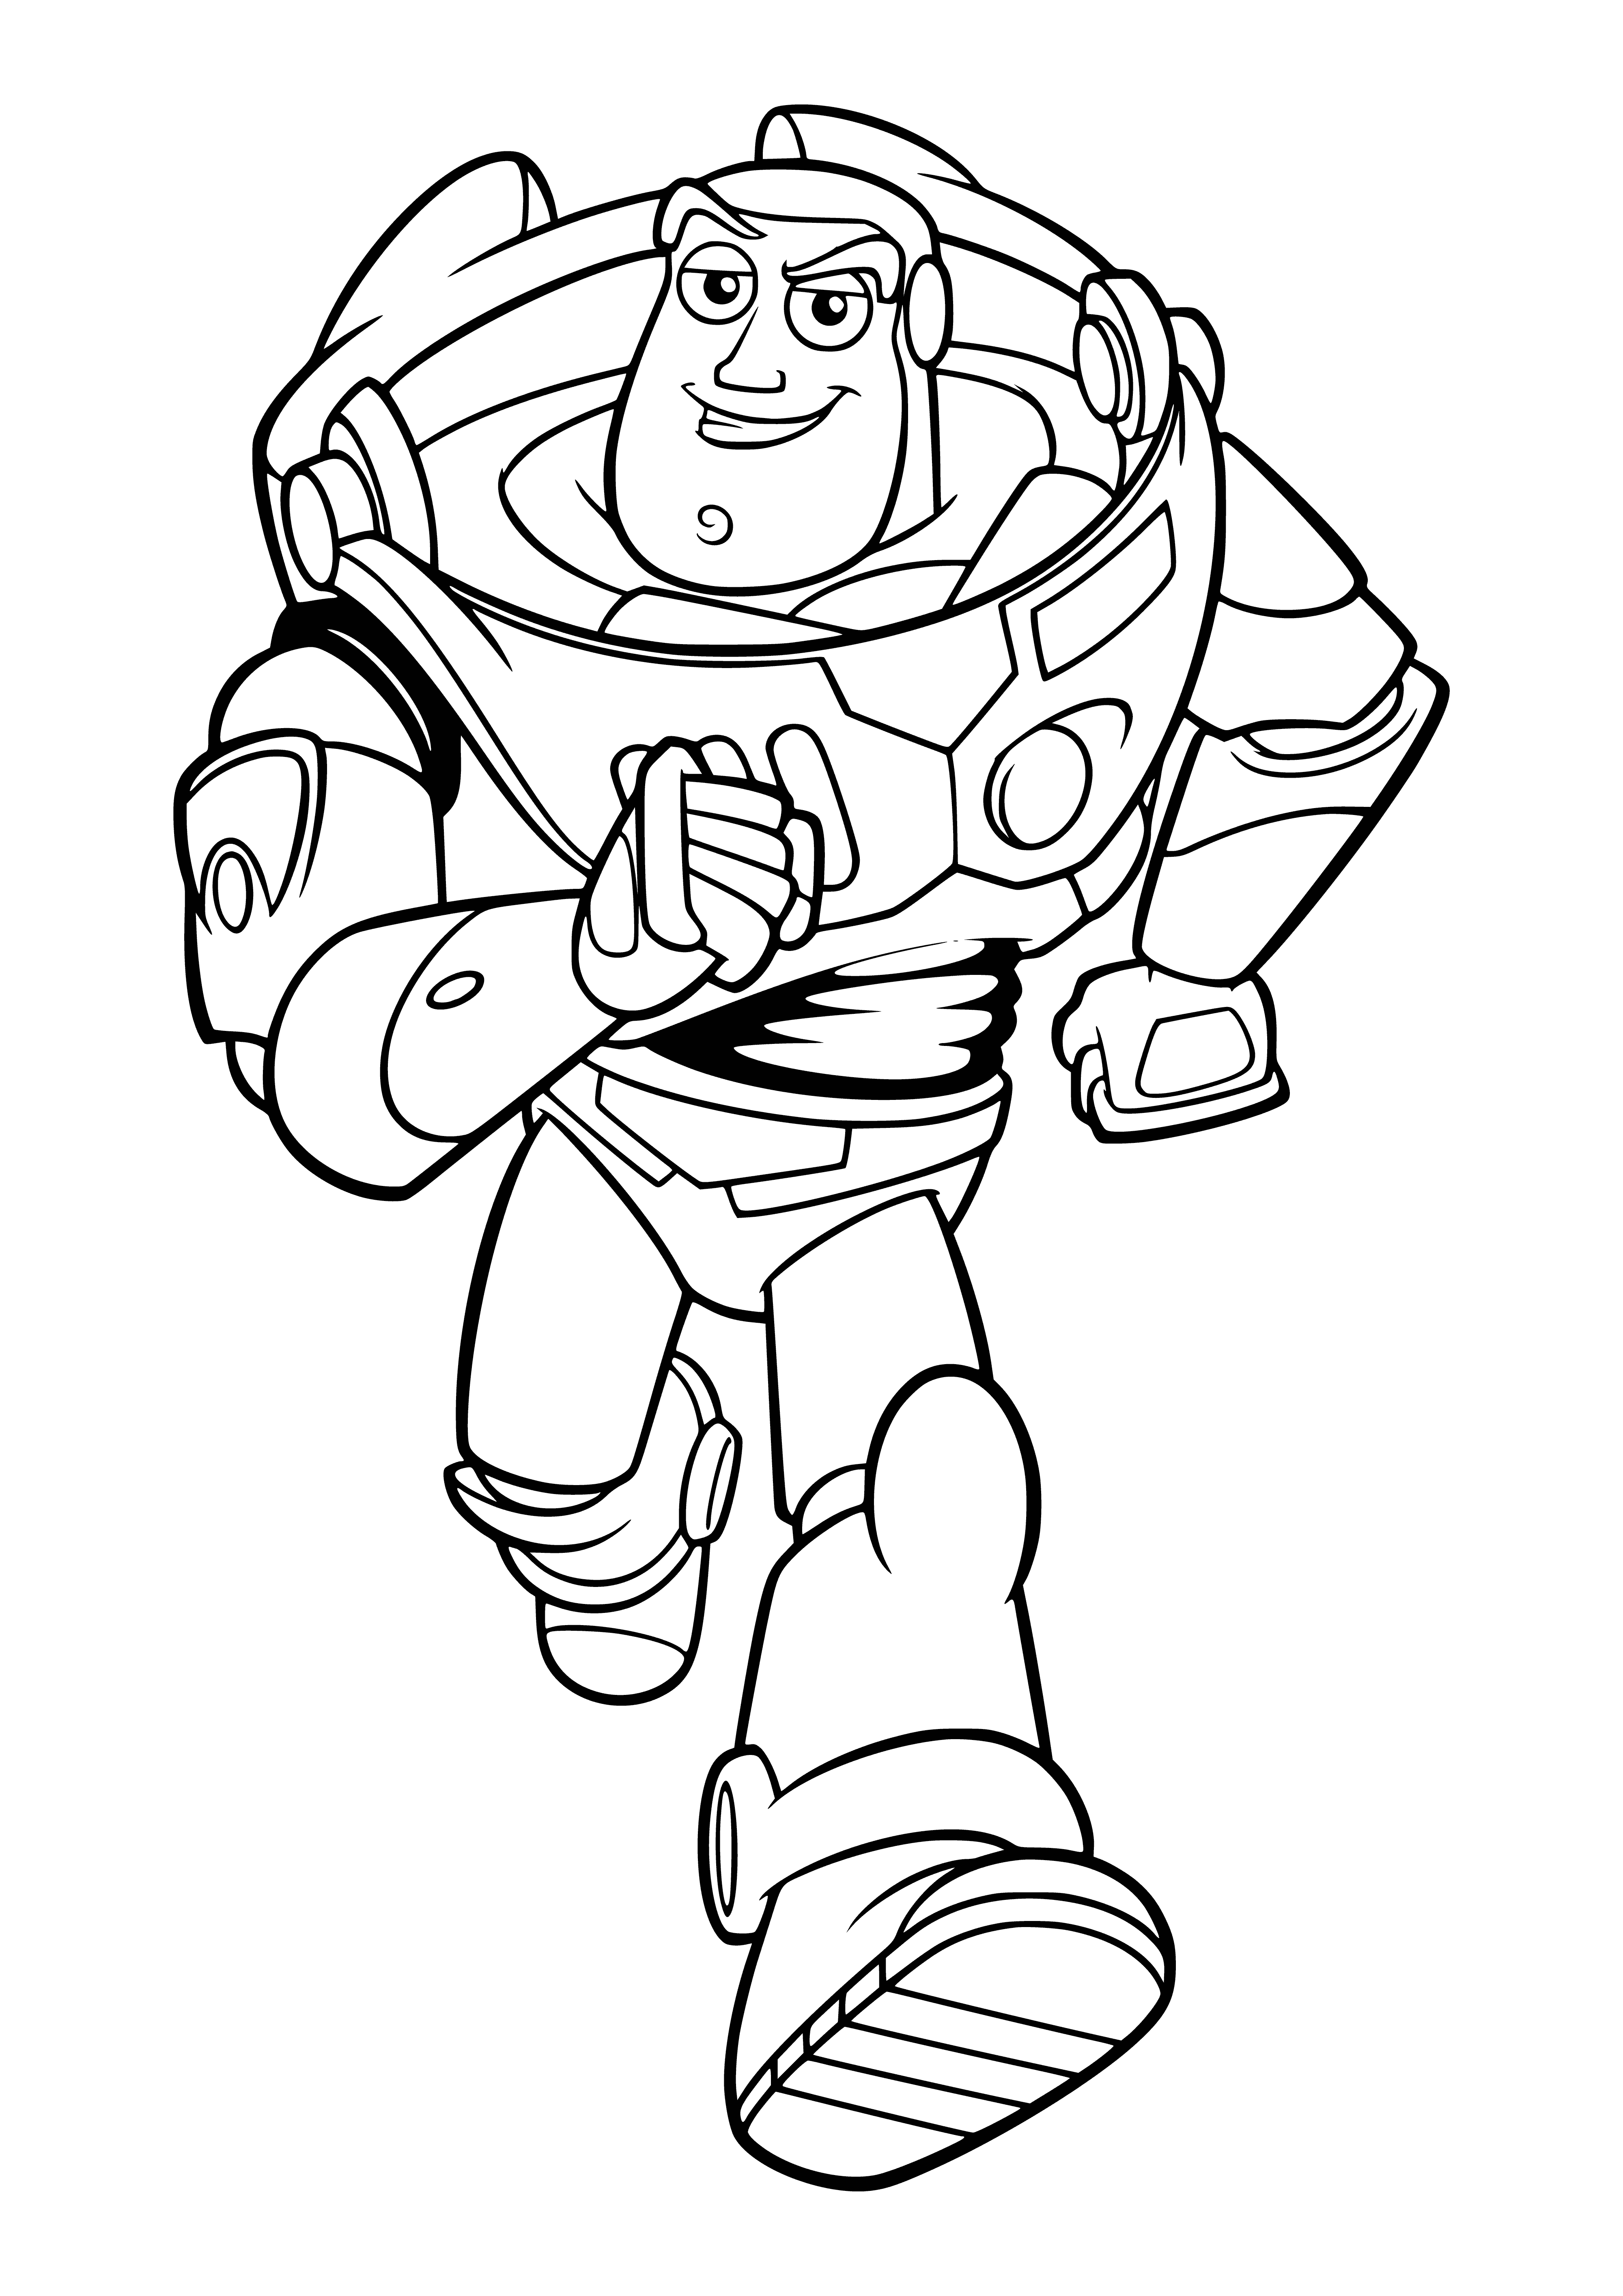 Astroranger Buzz Brightwing coloring page